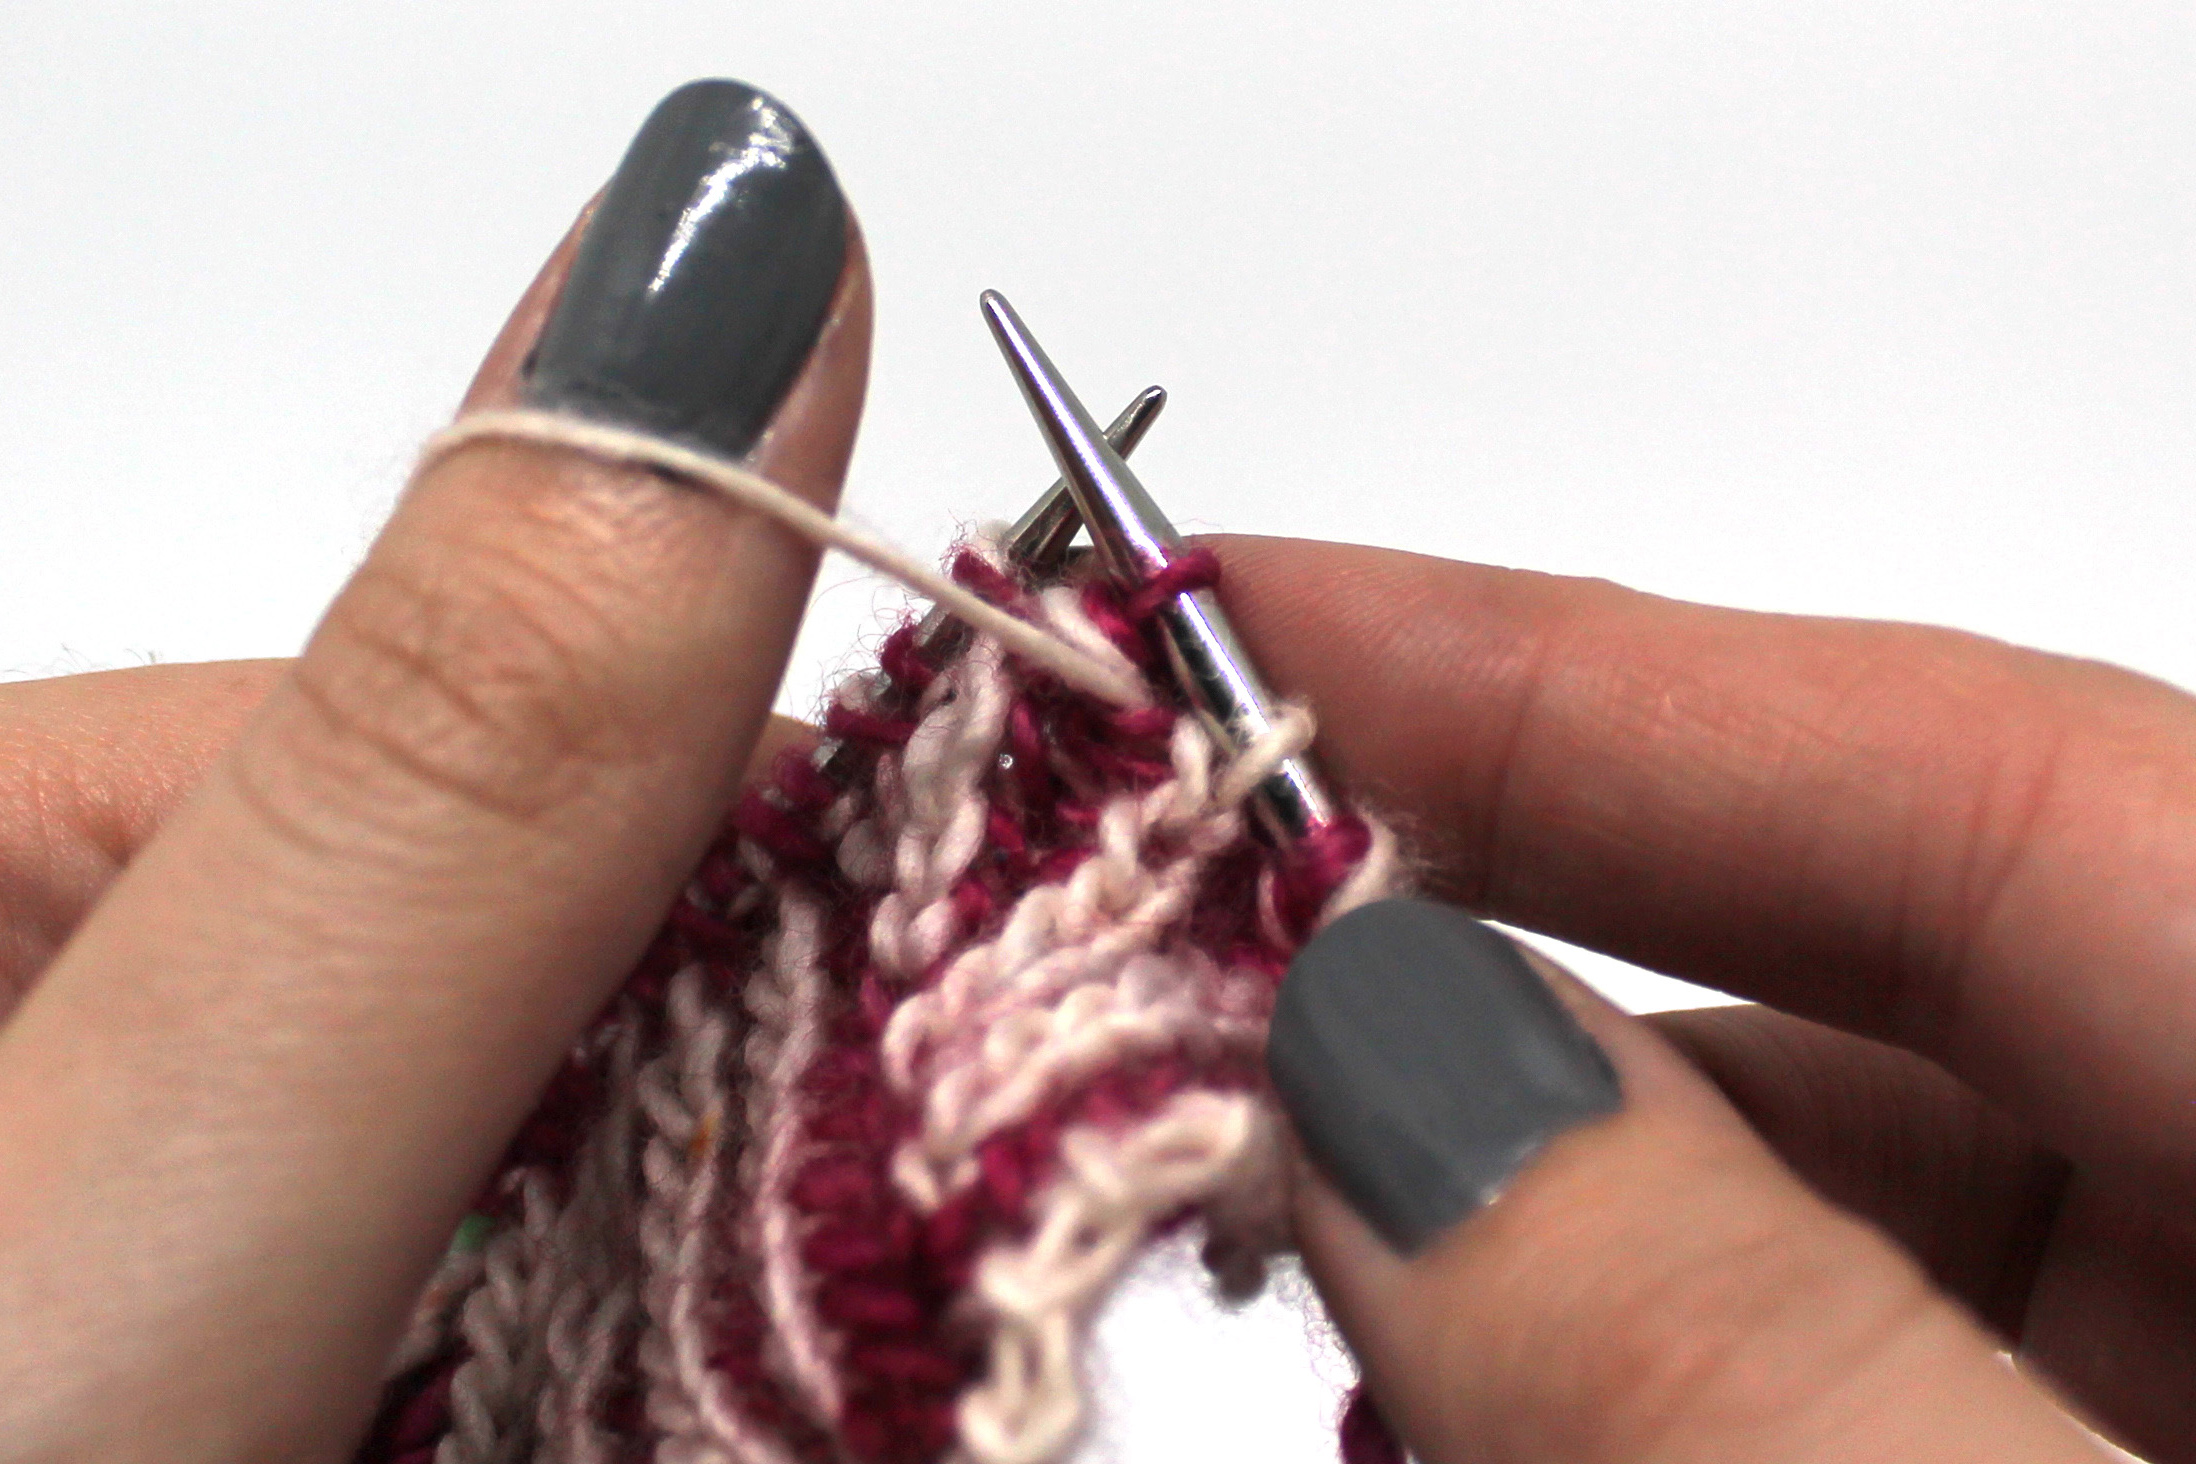 The first stitch on the left hand needle has been slipped to the right hand needle